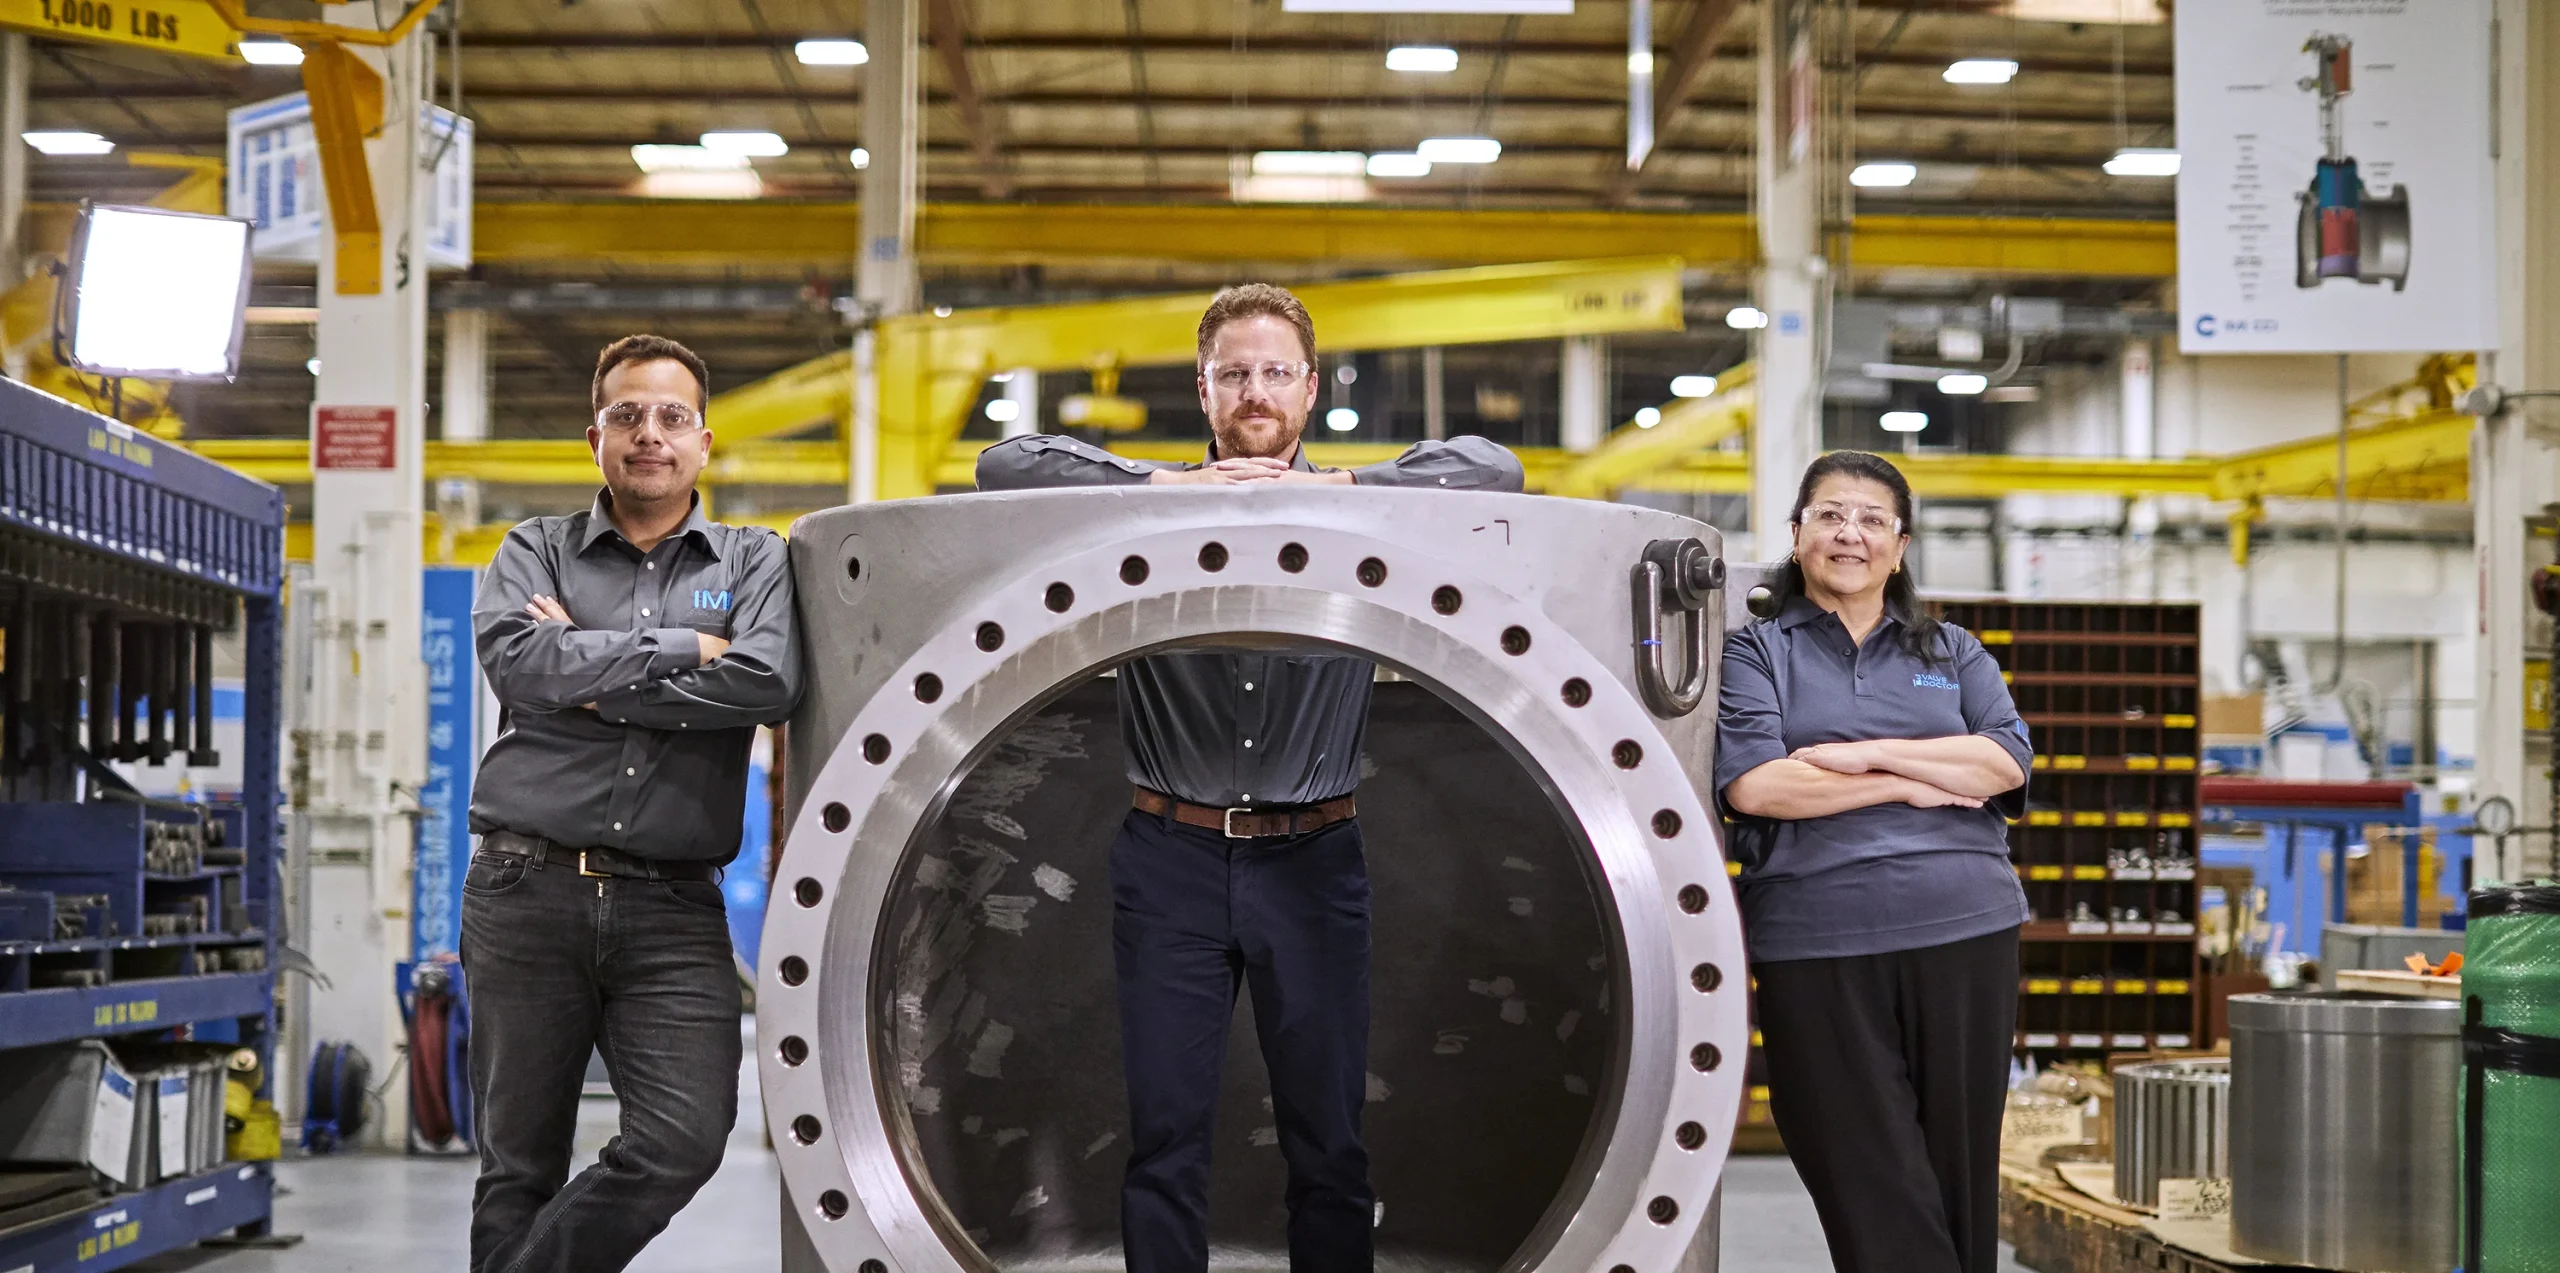 Three experts from IMI Critical Americas in RSM confidently display their mastery of control valve technology, striking a pose in and around a large control valve body, exemplifying IMI Critical's industry-leading expertise.